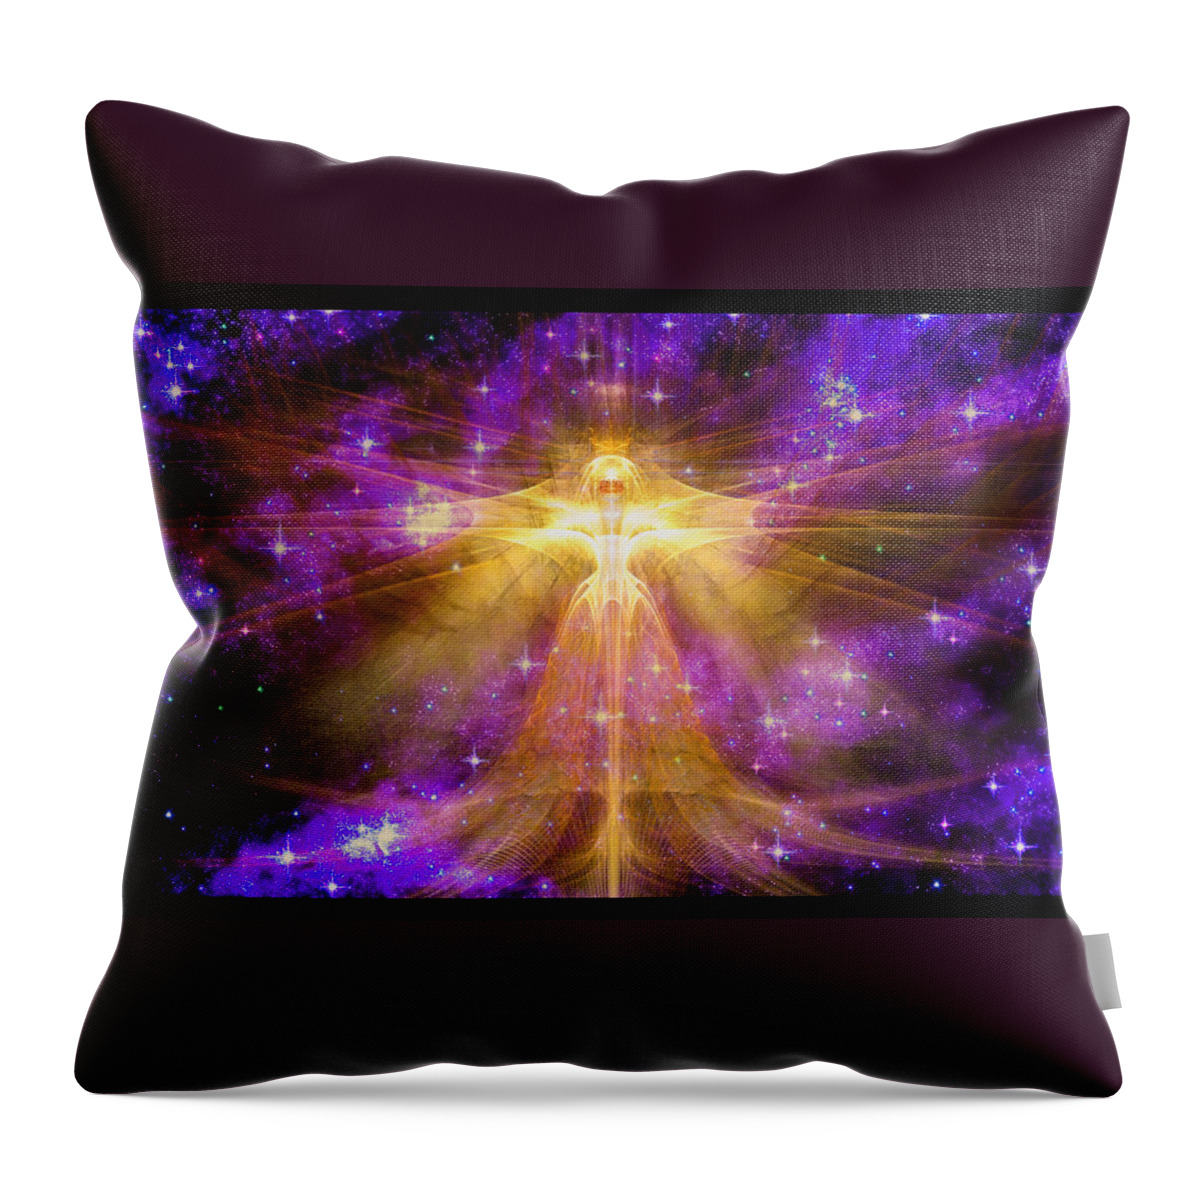 Corporate Throw Pillow featuring the digital art Cosmic Angel by Shawn Dall